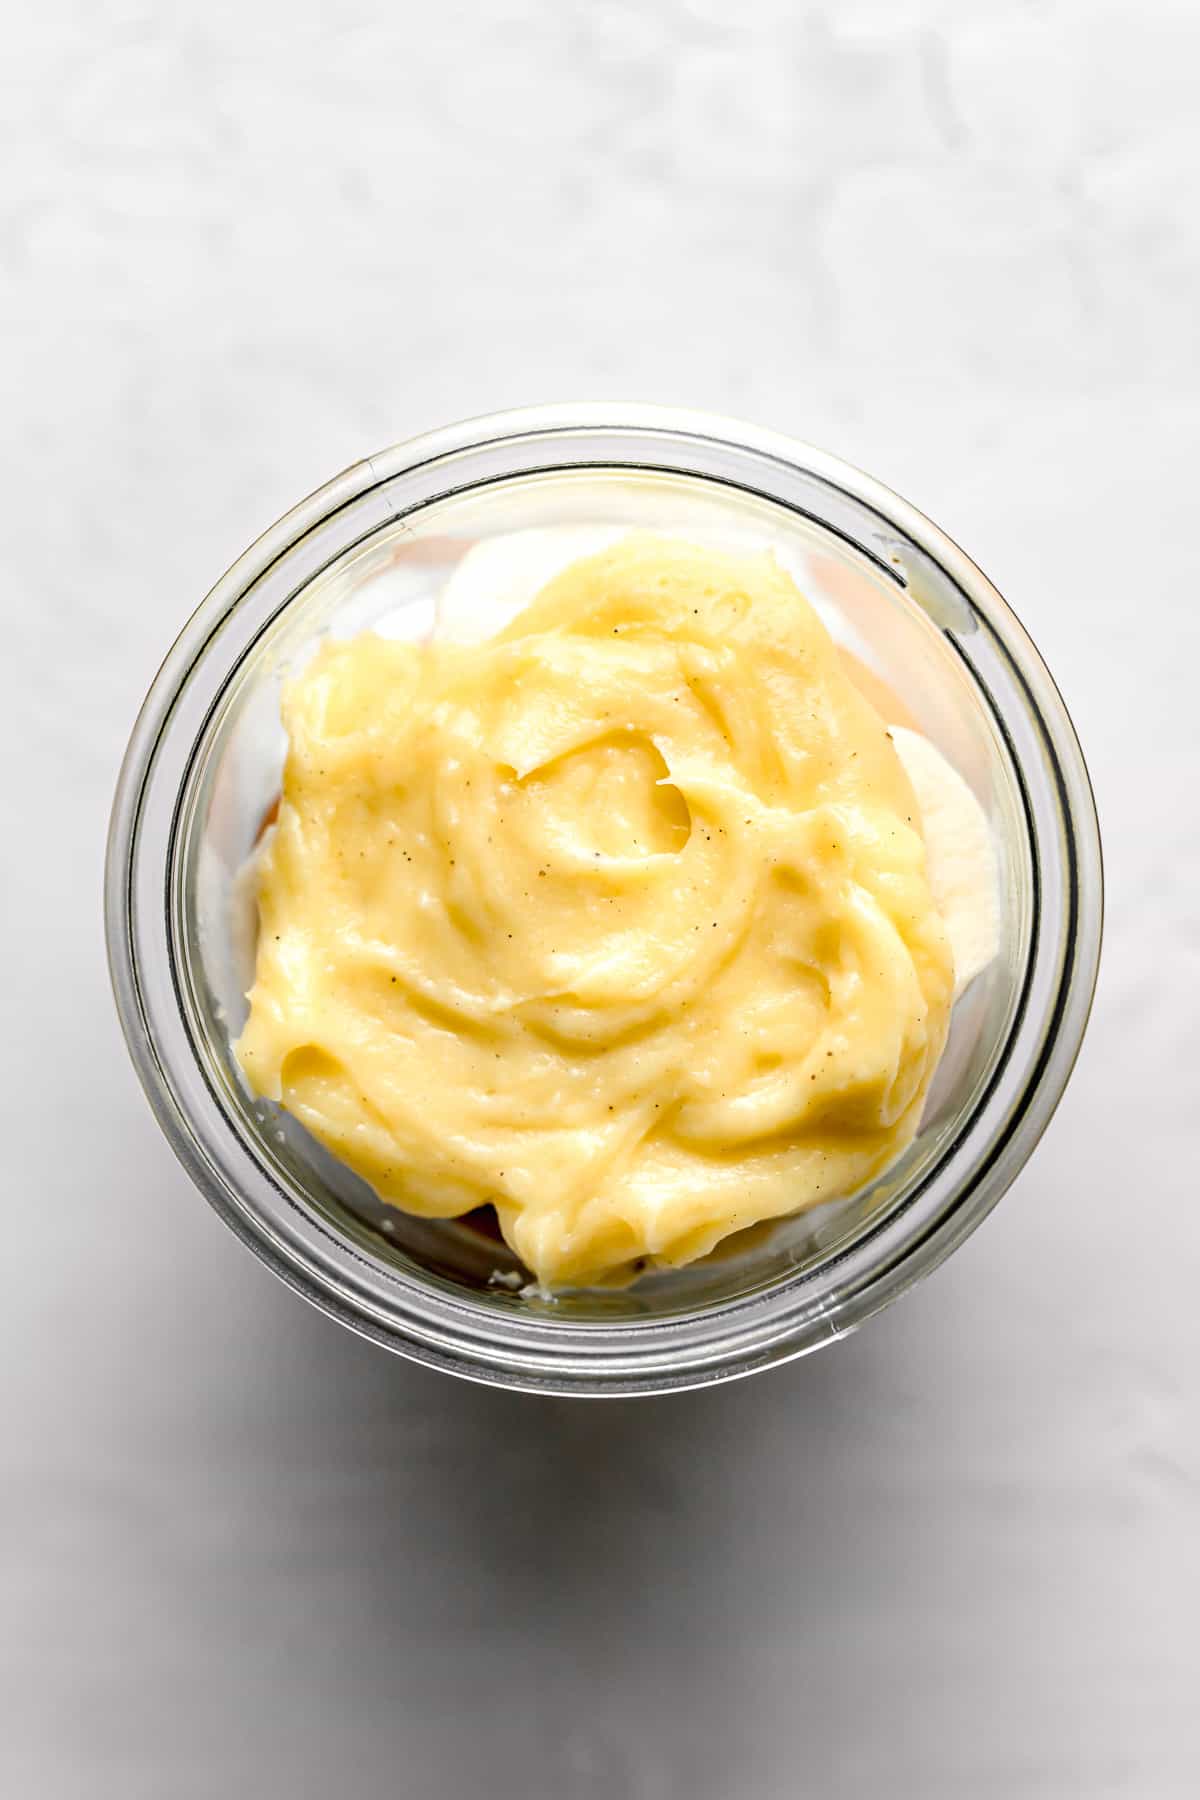 layer of pastry cream added in jar.